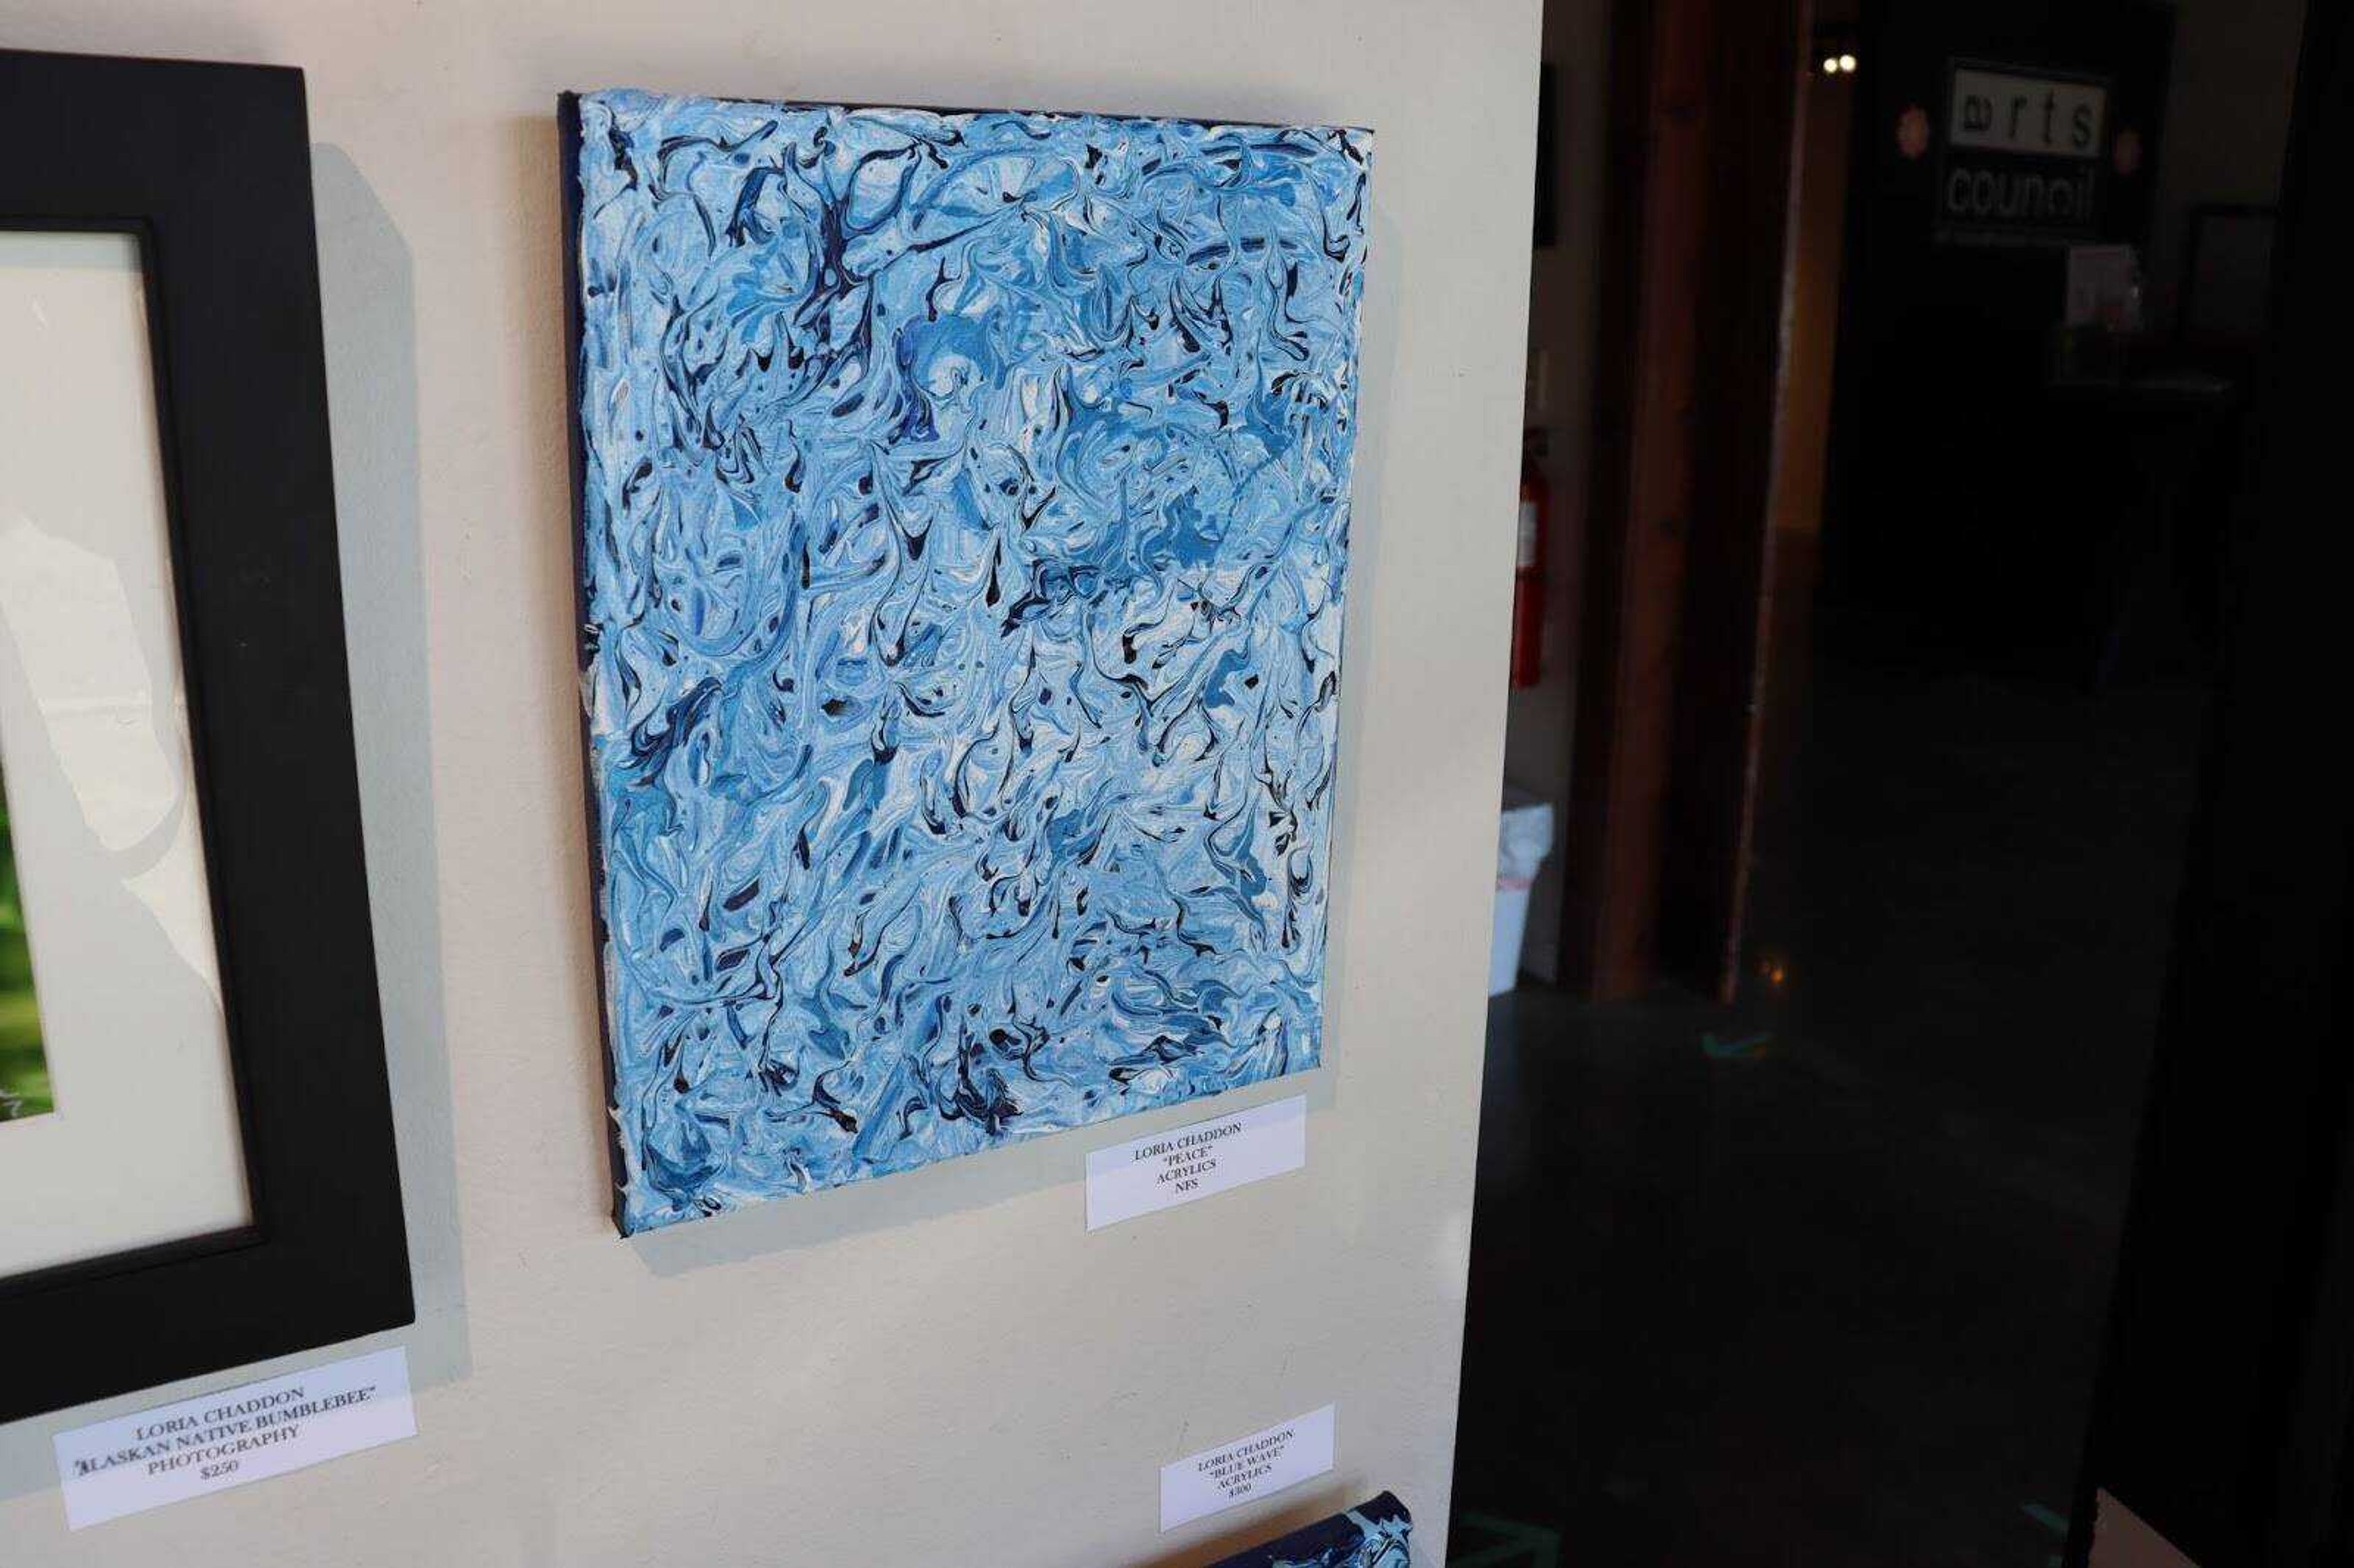 Loria Chaddon’s favorite painting in the Arts Council of Southeast Missouri’s window exhibit, titled “Peace.” The piece Loria Chaddon said to be one of the hardest to make but also the most rewarding.